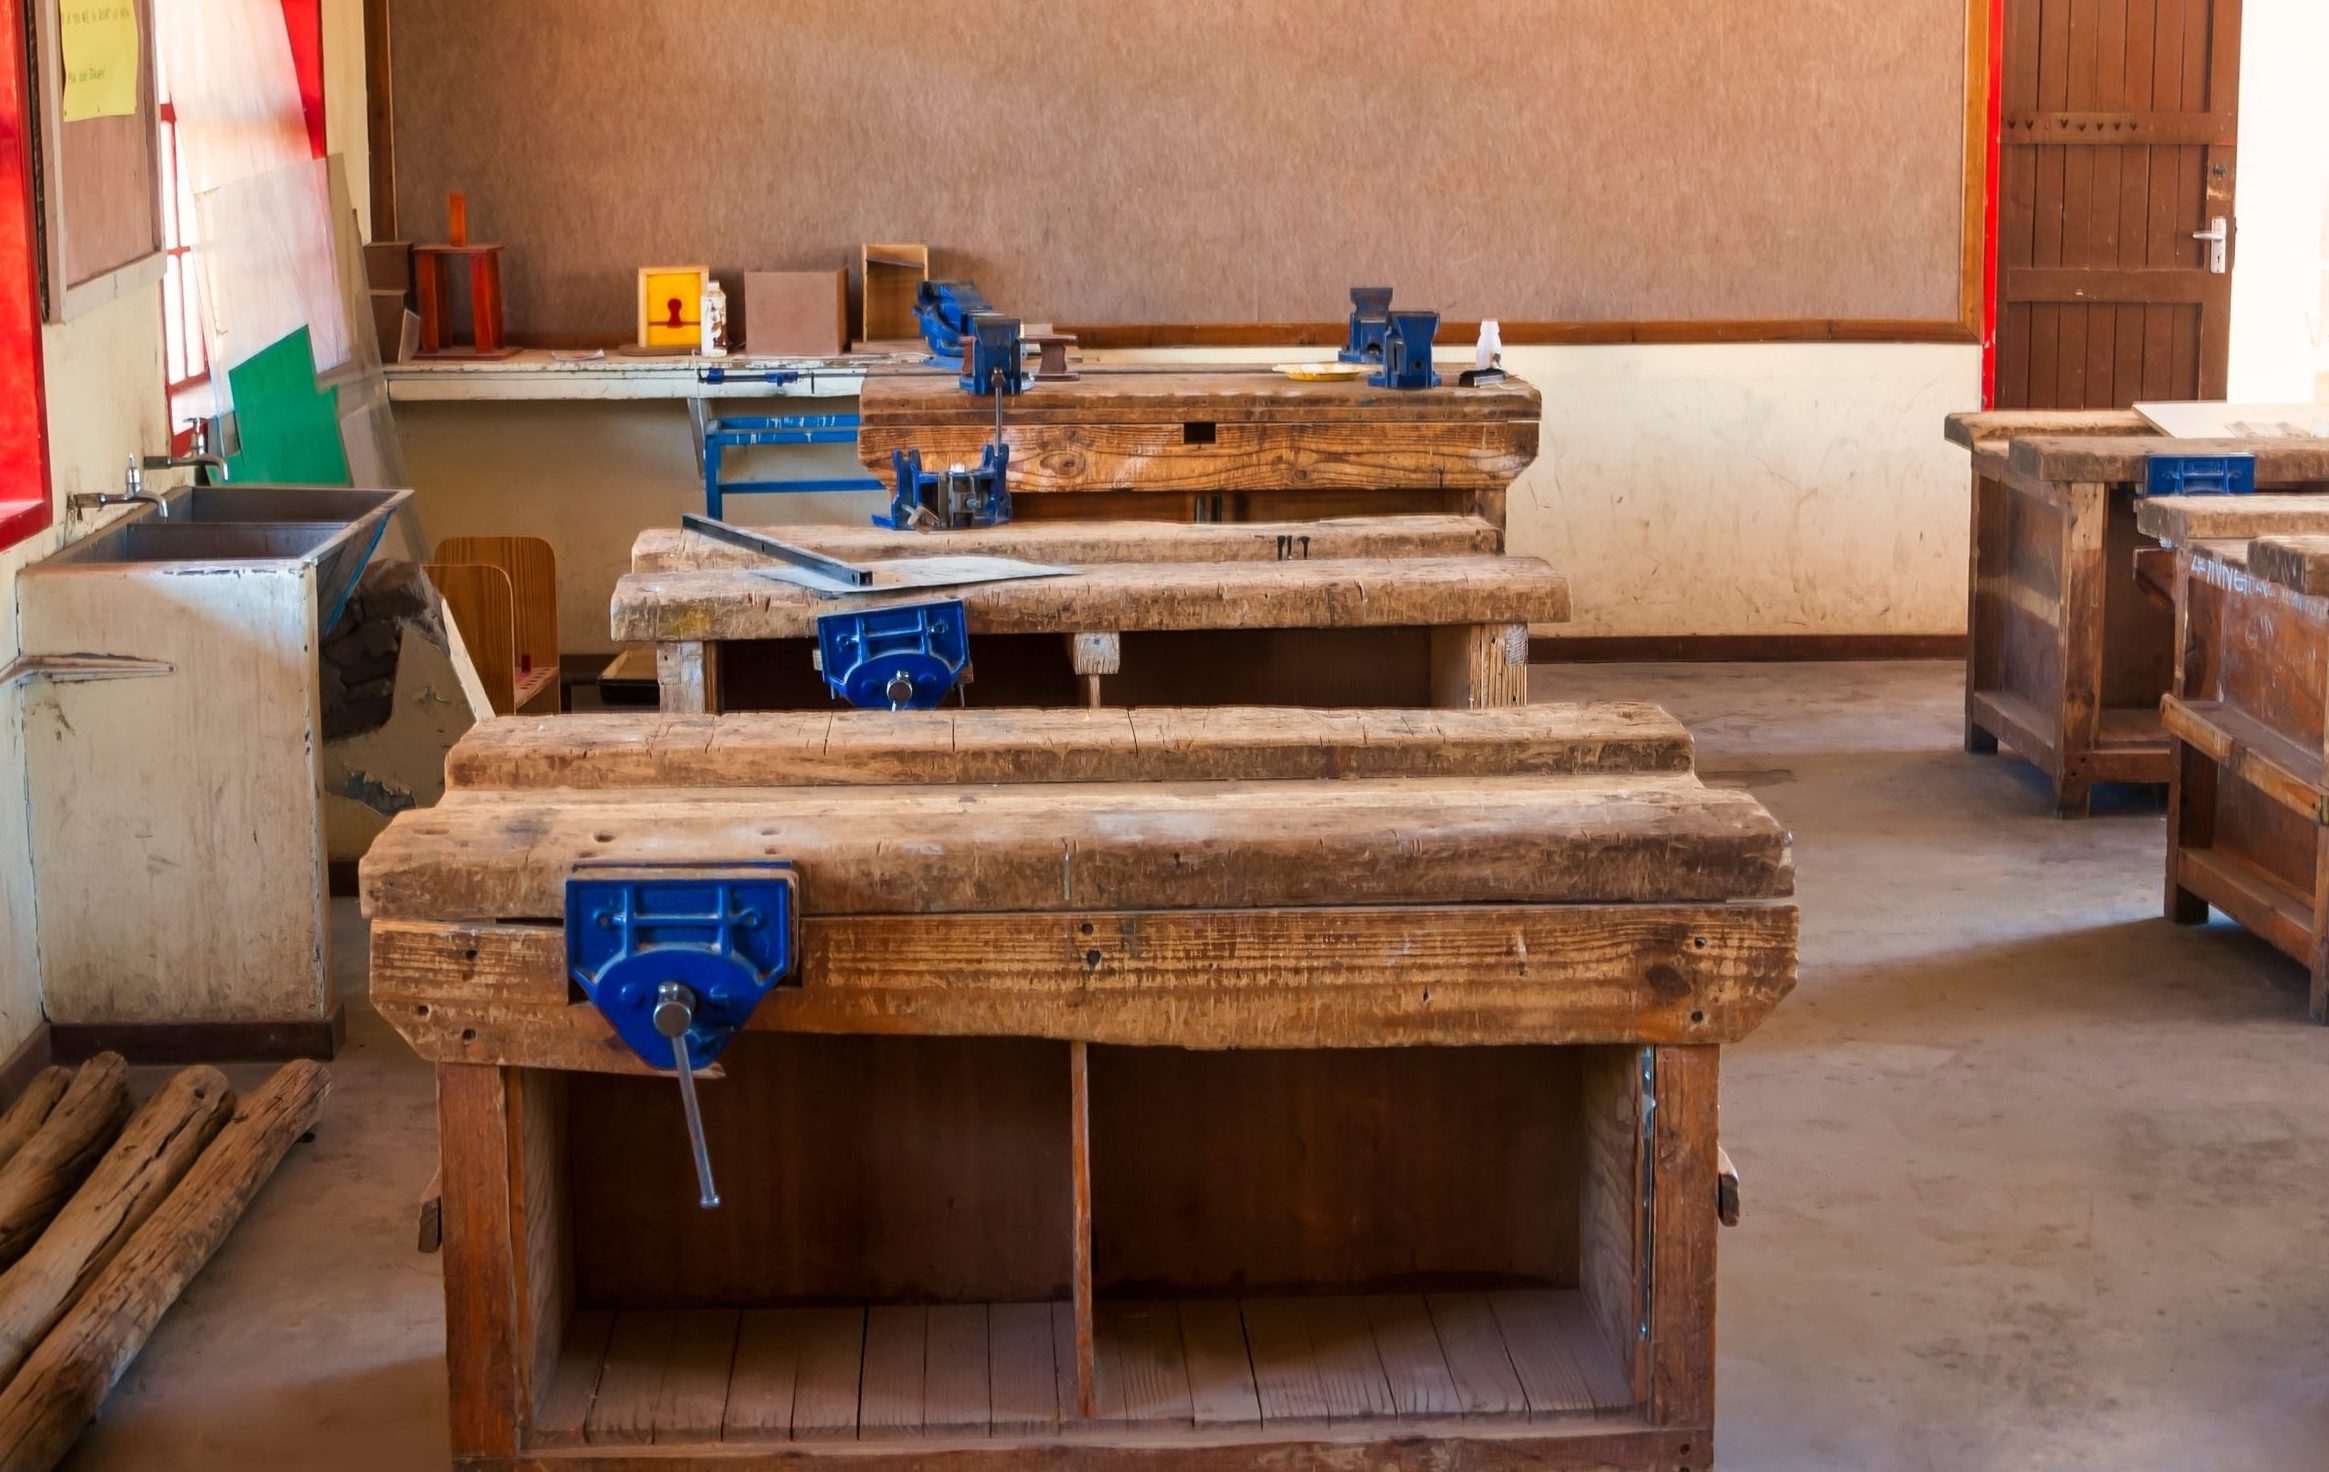 Classroom,Workshop,Teaching,Wood,Working,At,An,African,Trades,School